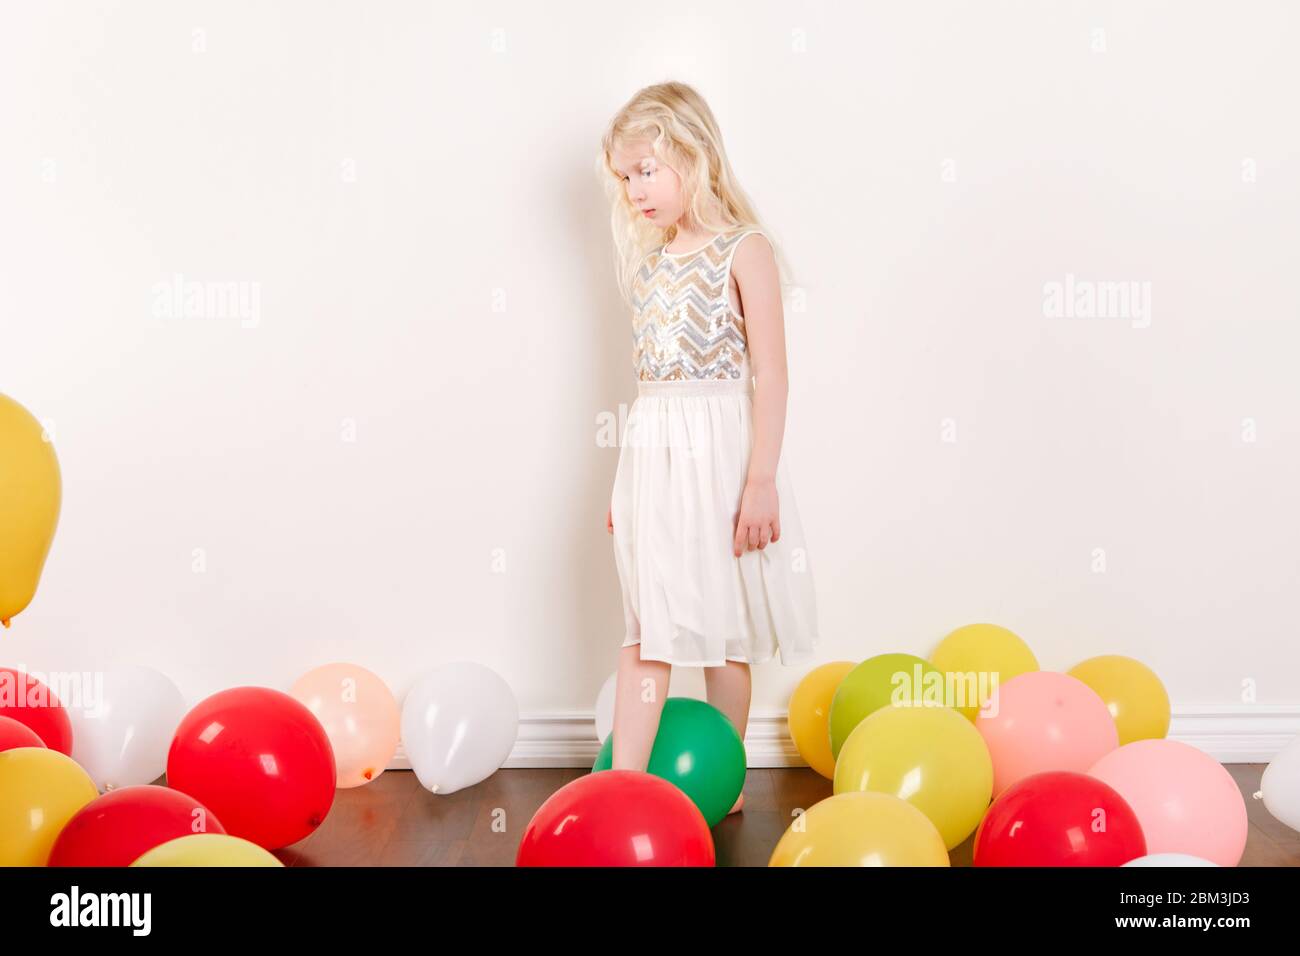 Sad upset little girl celebrating birthday at home. Lovely lonely unhappy girl child with colorful balloons. Quarantine birthday party at home alone d Stock Photo